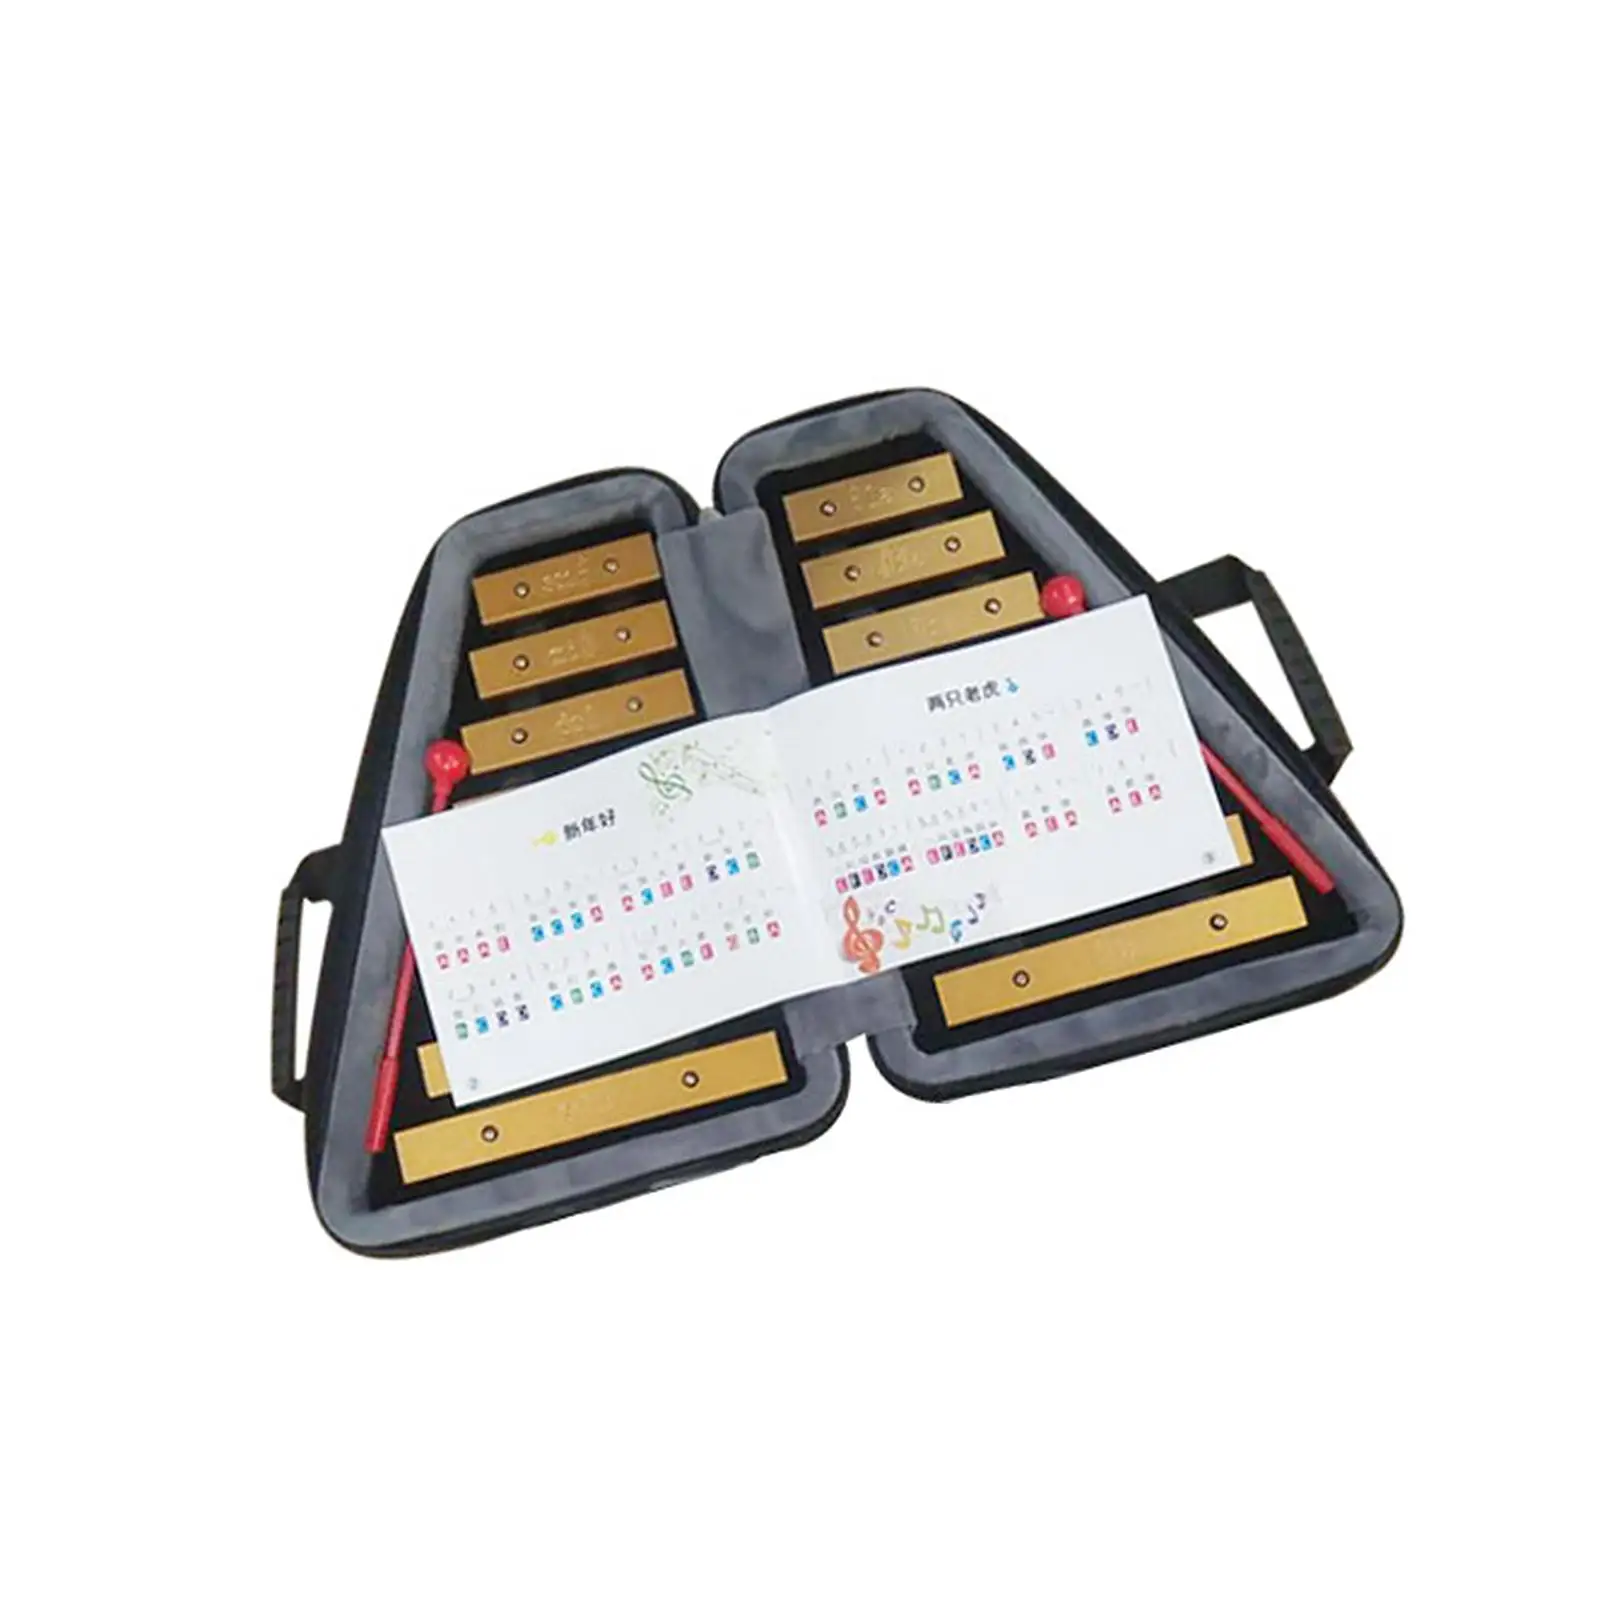 16 Note Glockenspiel Coordination Motor Skill Hand Knock Piano Toy for Live Performance Concert School Orchestras Outside Home